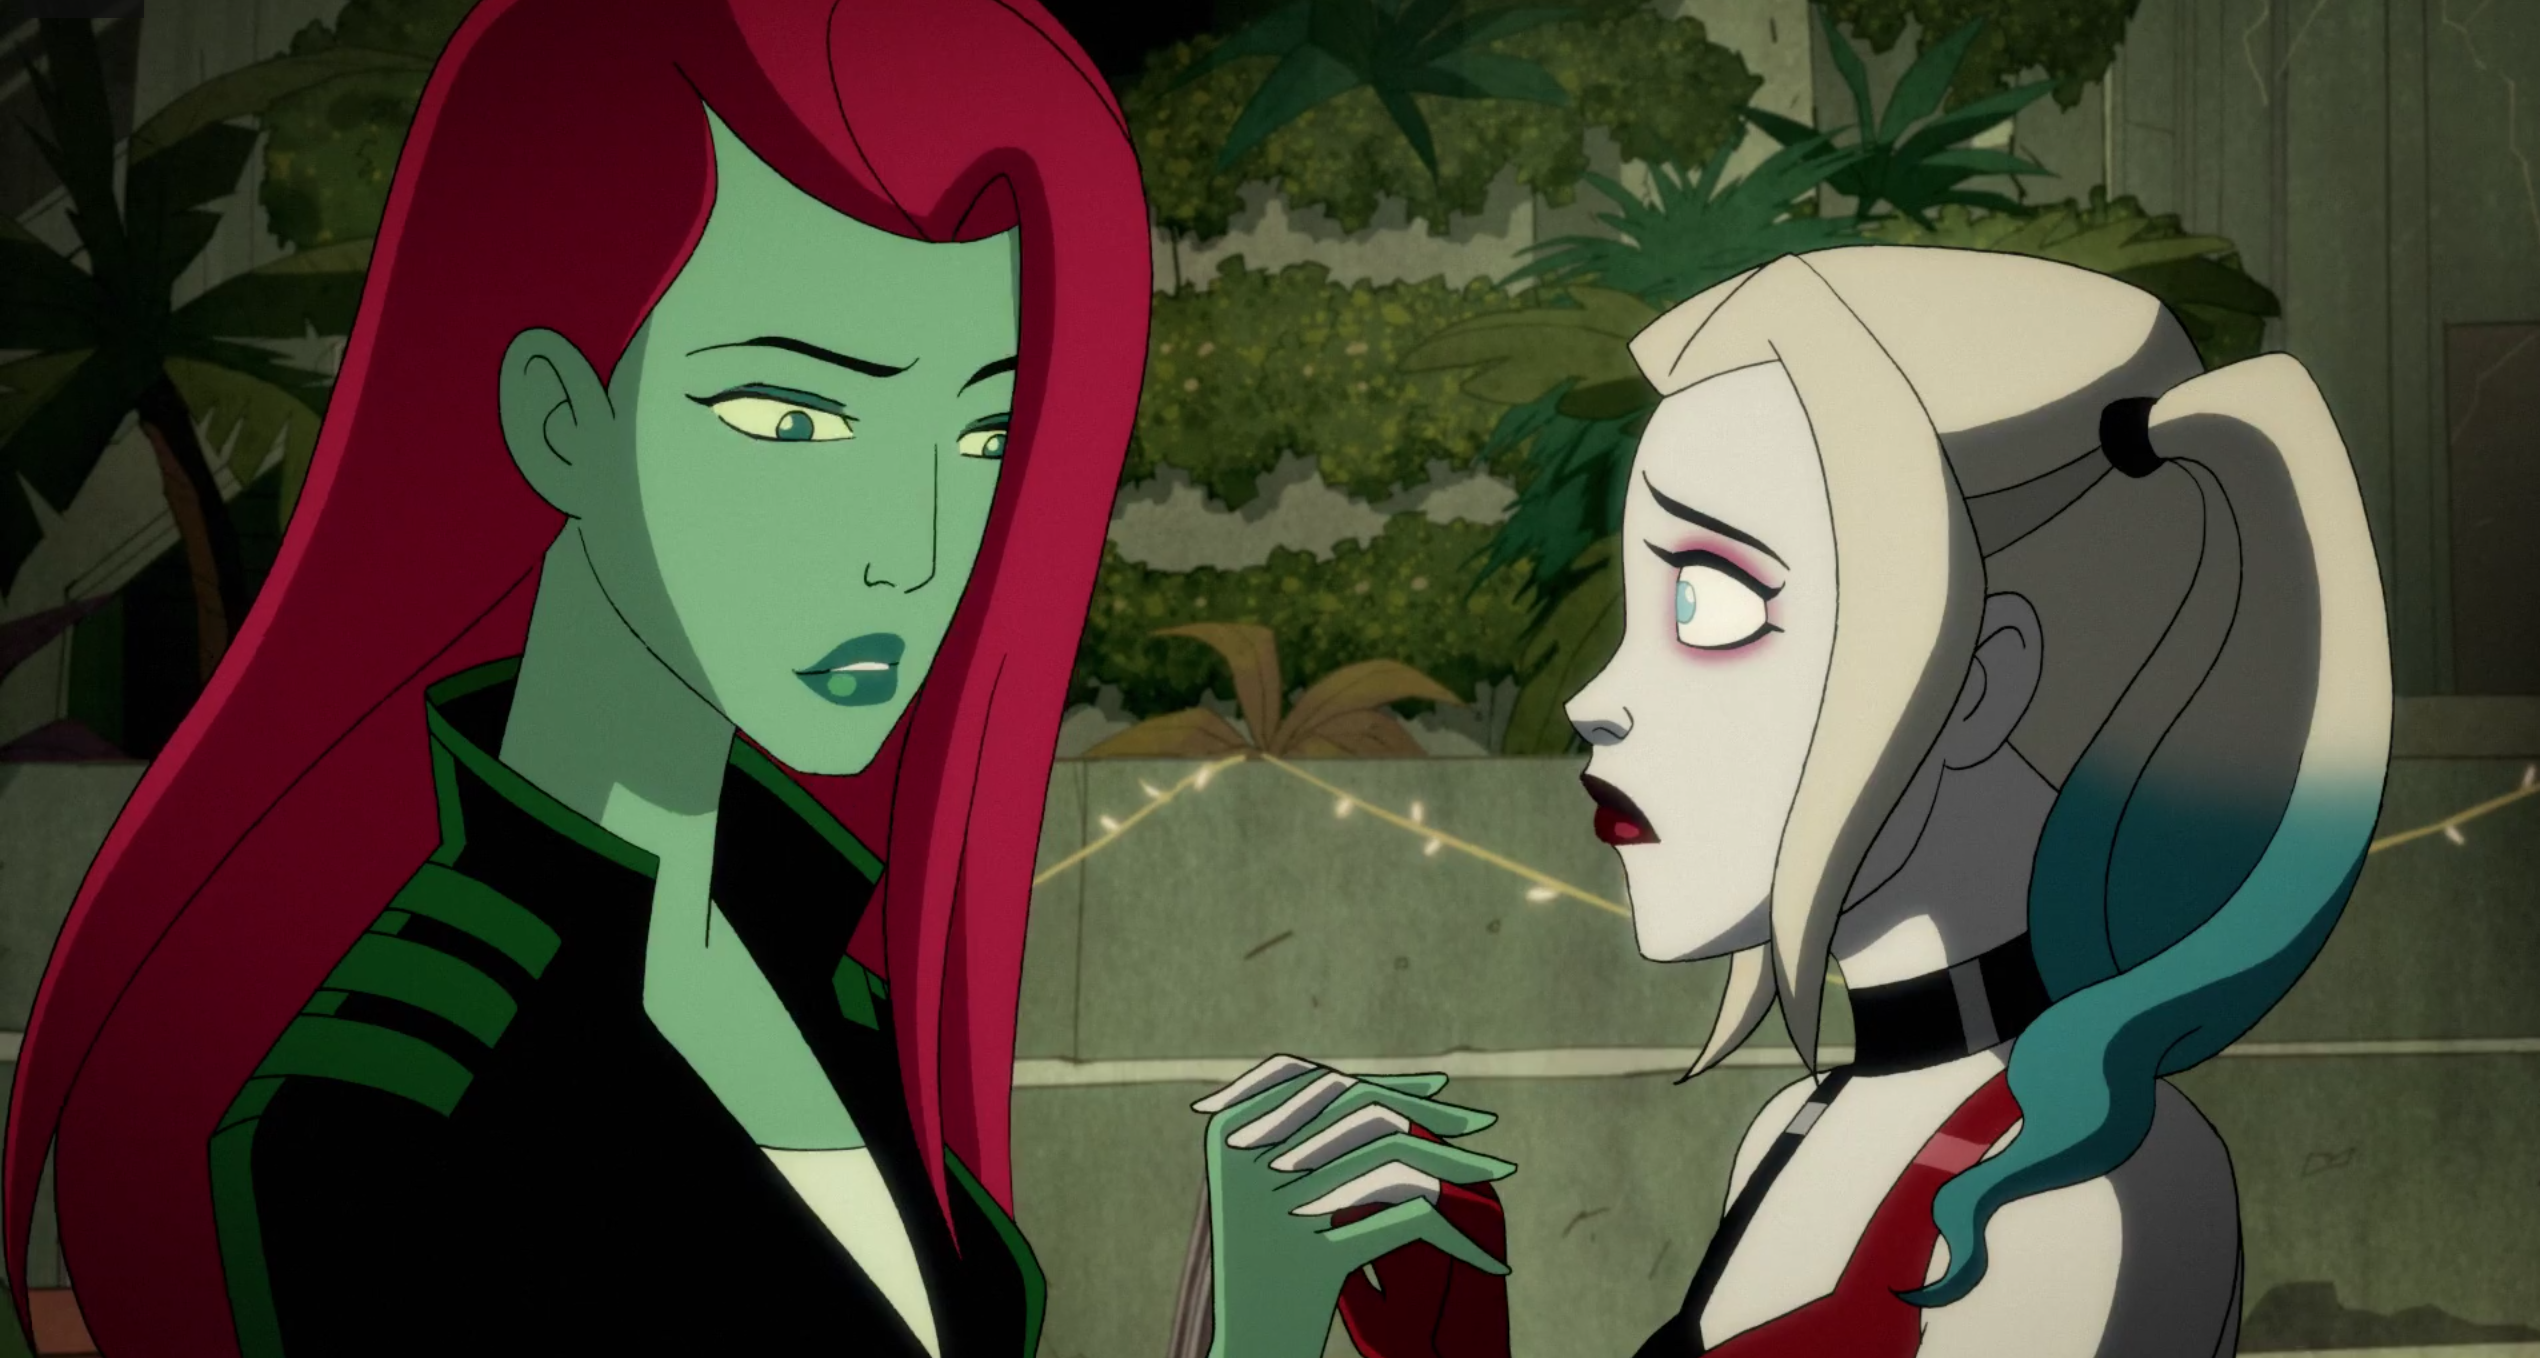 Poison Ivy and Harley Quinn holding hands